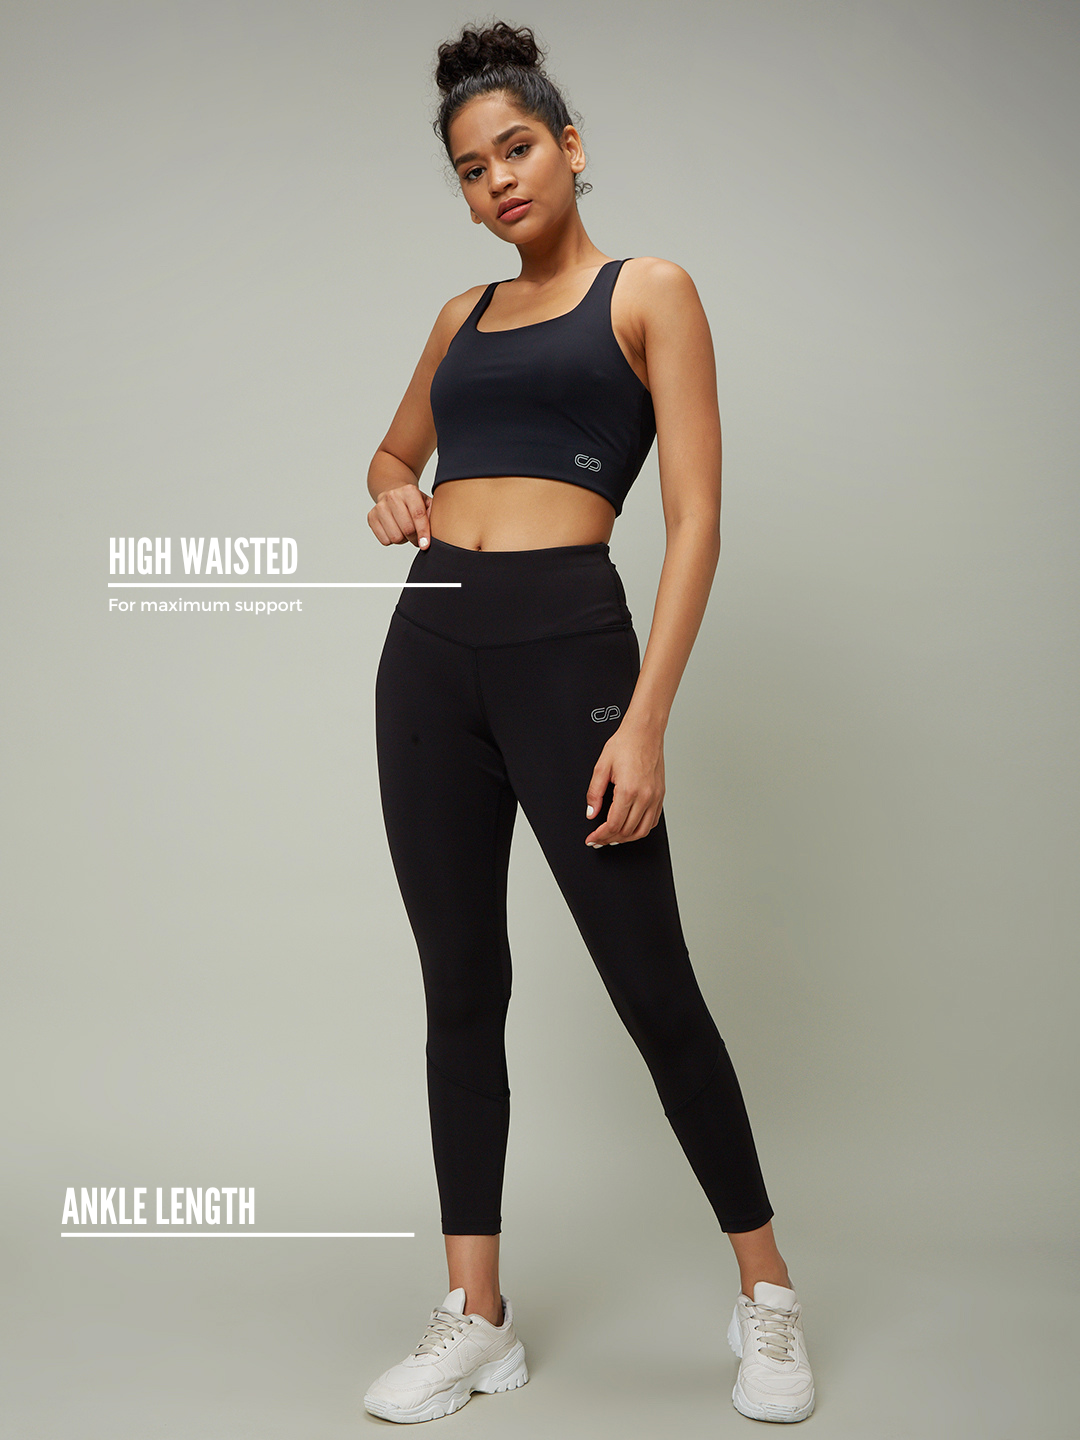 Abcnature Yoga Pants for Women with Pockets, High Waisted Athletic Running  Workout Leggings 7/8 Length, Ladies Hip Lifting Elastic Leggings with Bow